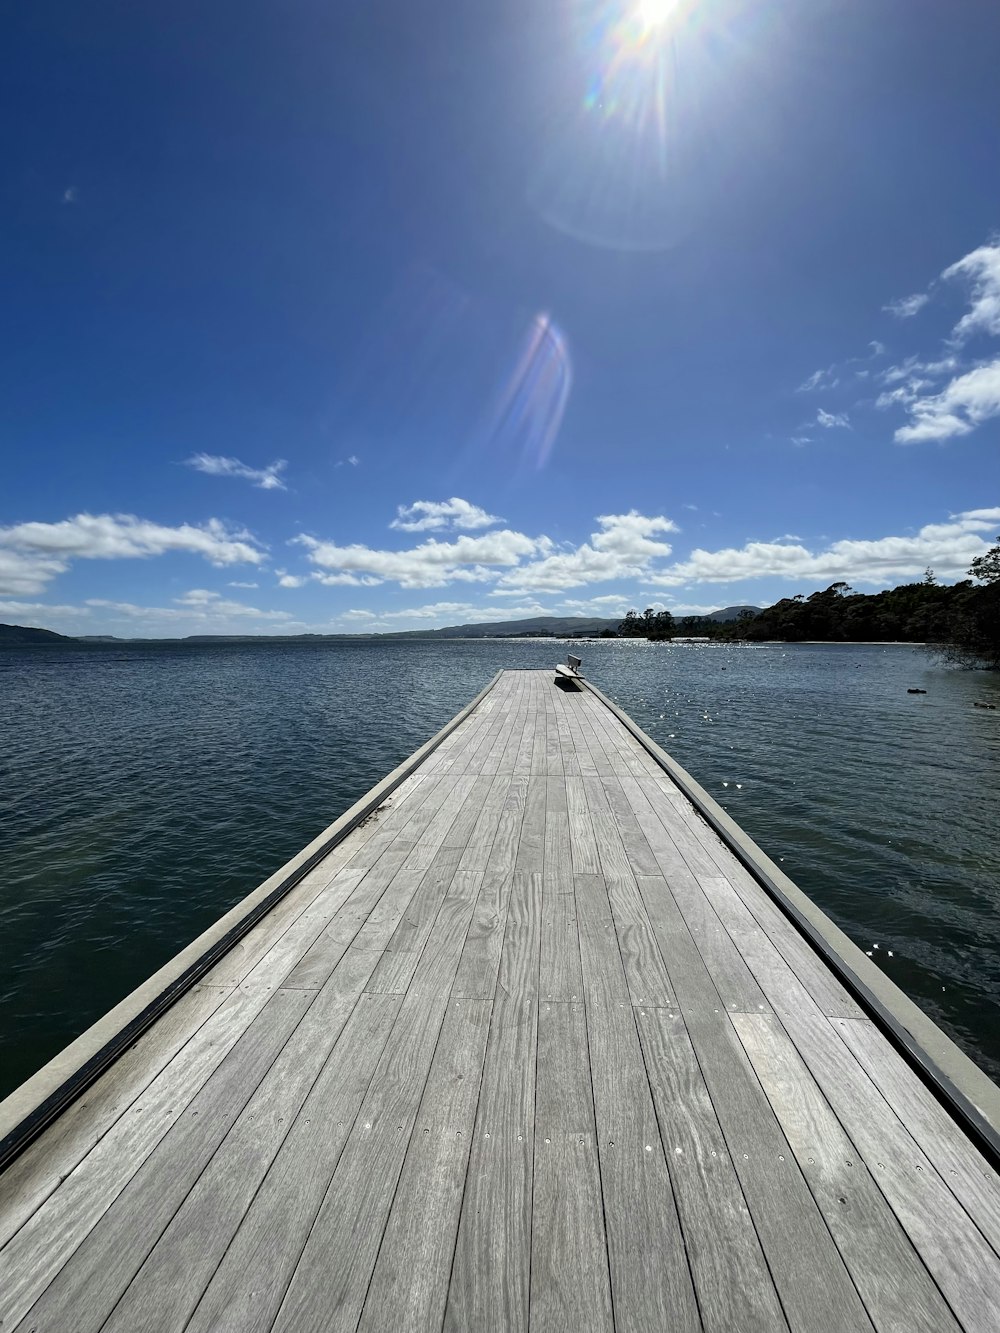 a long wooden pier extending into the water